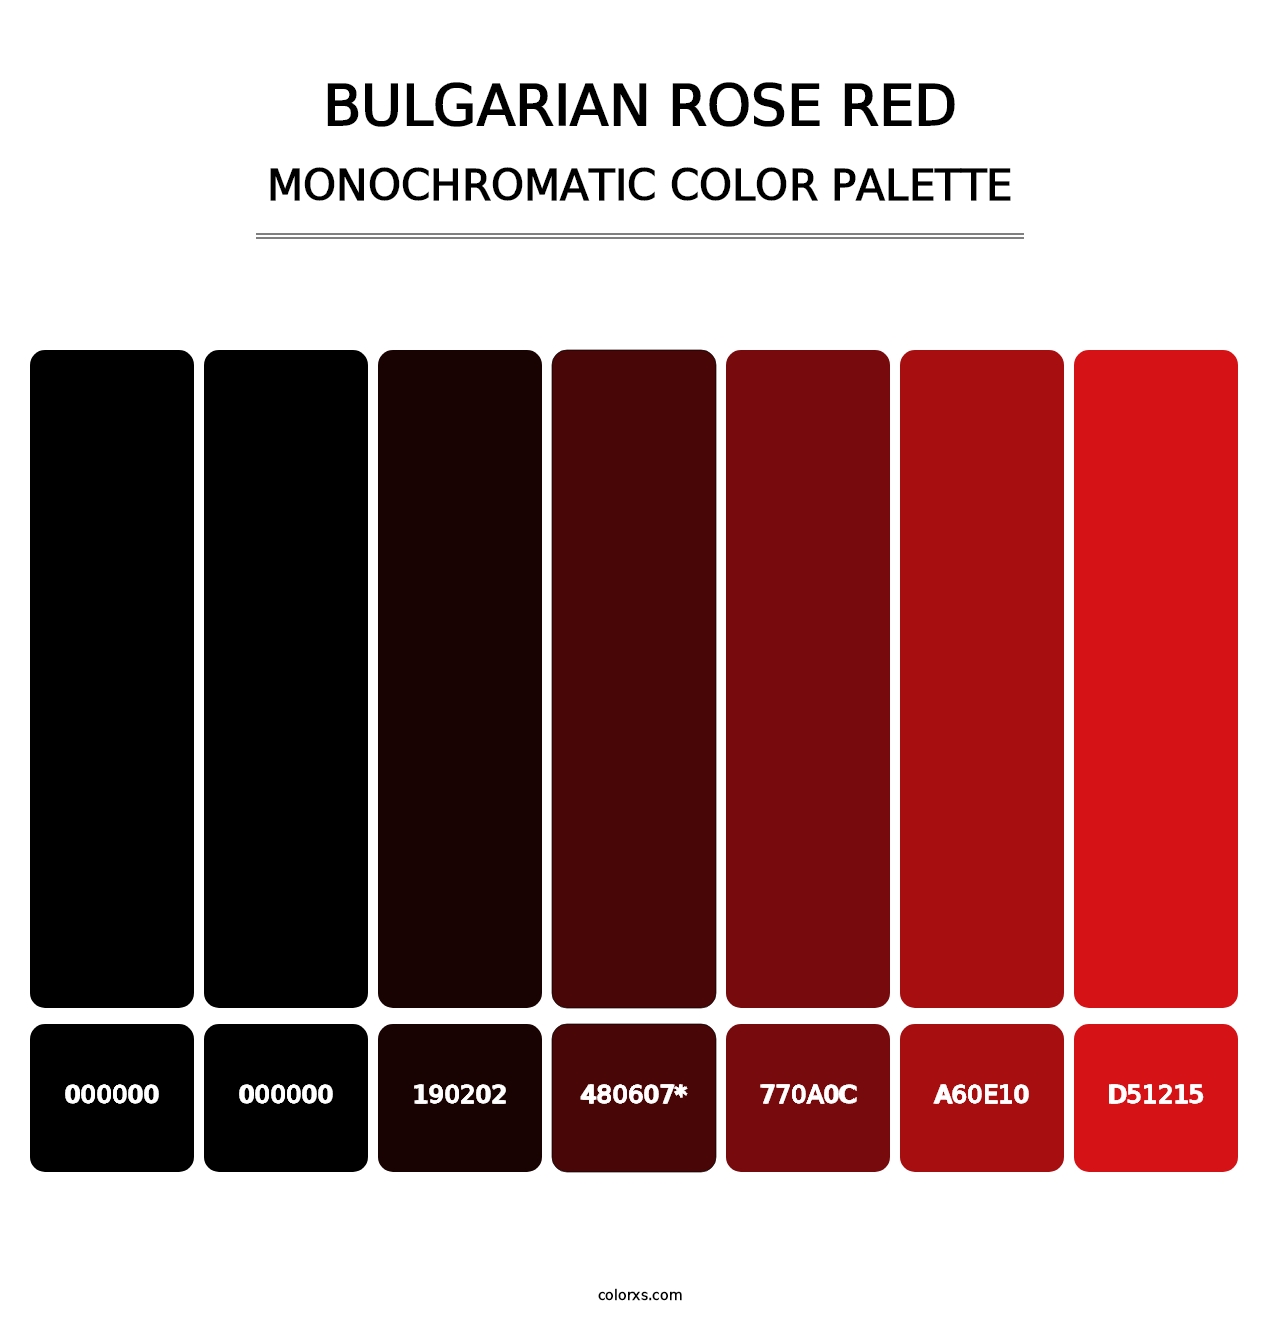 Bulgarian Rose Red - Monochromatic Color Palette